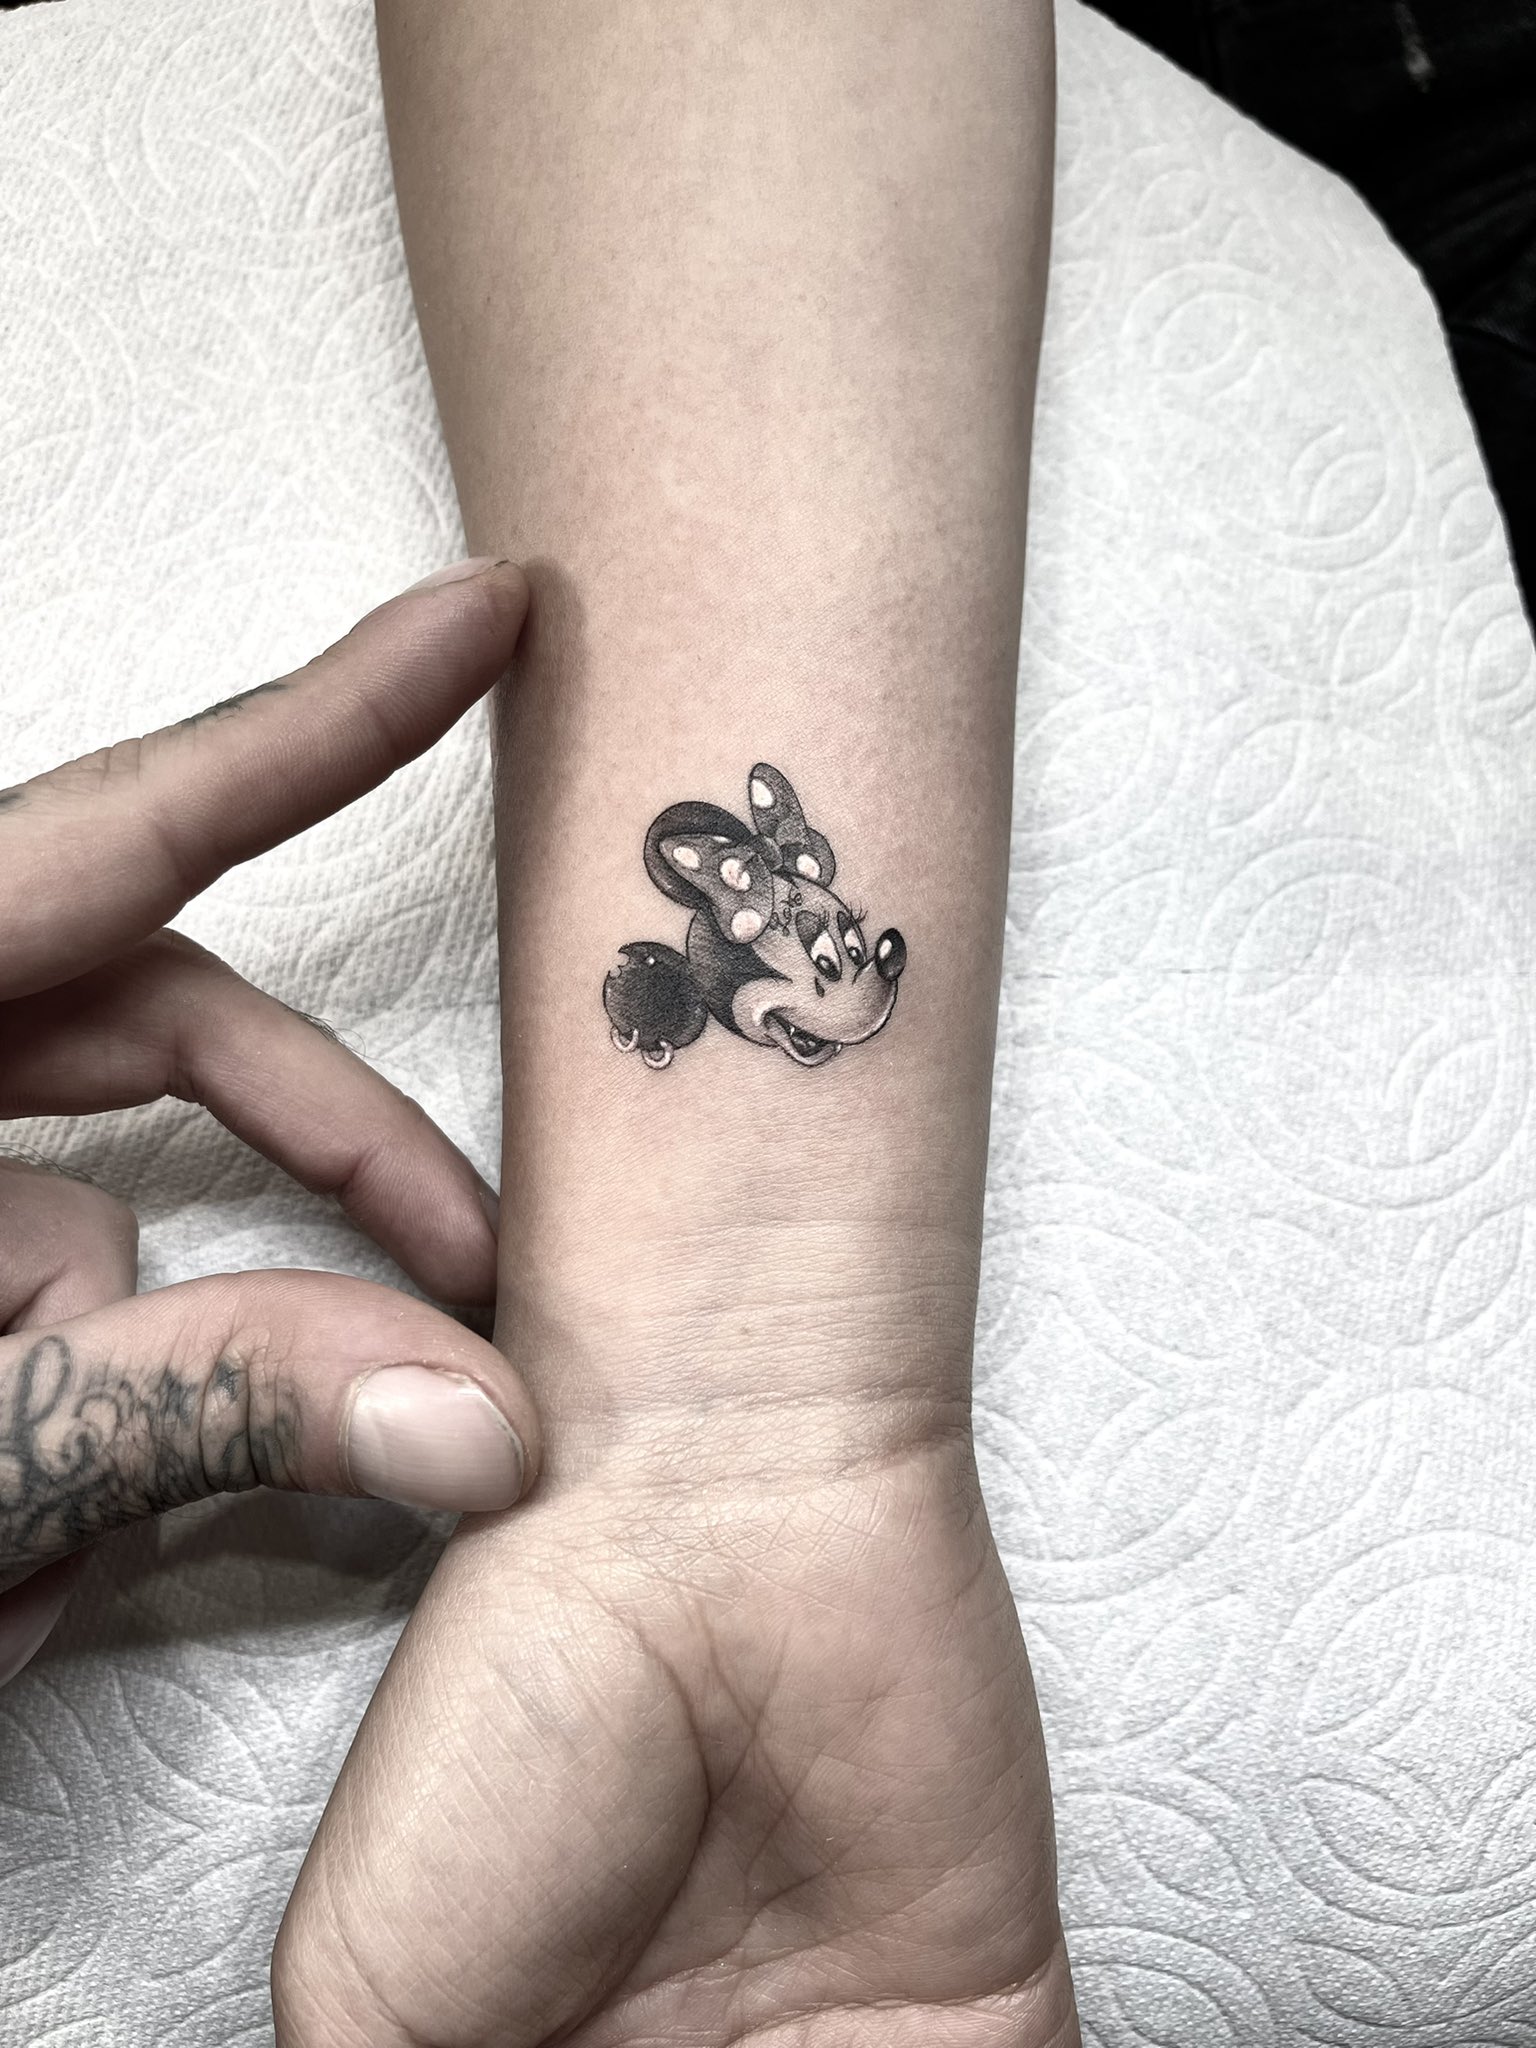 Ernest Shackleton Fra omhyggelig Romeo Lacoste on Twitter: "Micro single needle Disney Tattoos!! Would you  get one? https://t.co/lsRUkacPTB" / Twitter